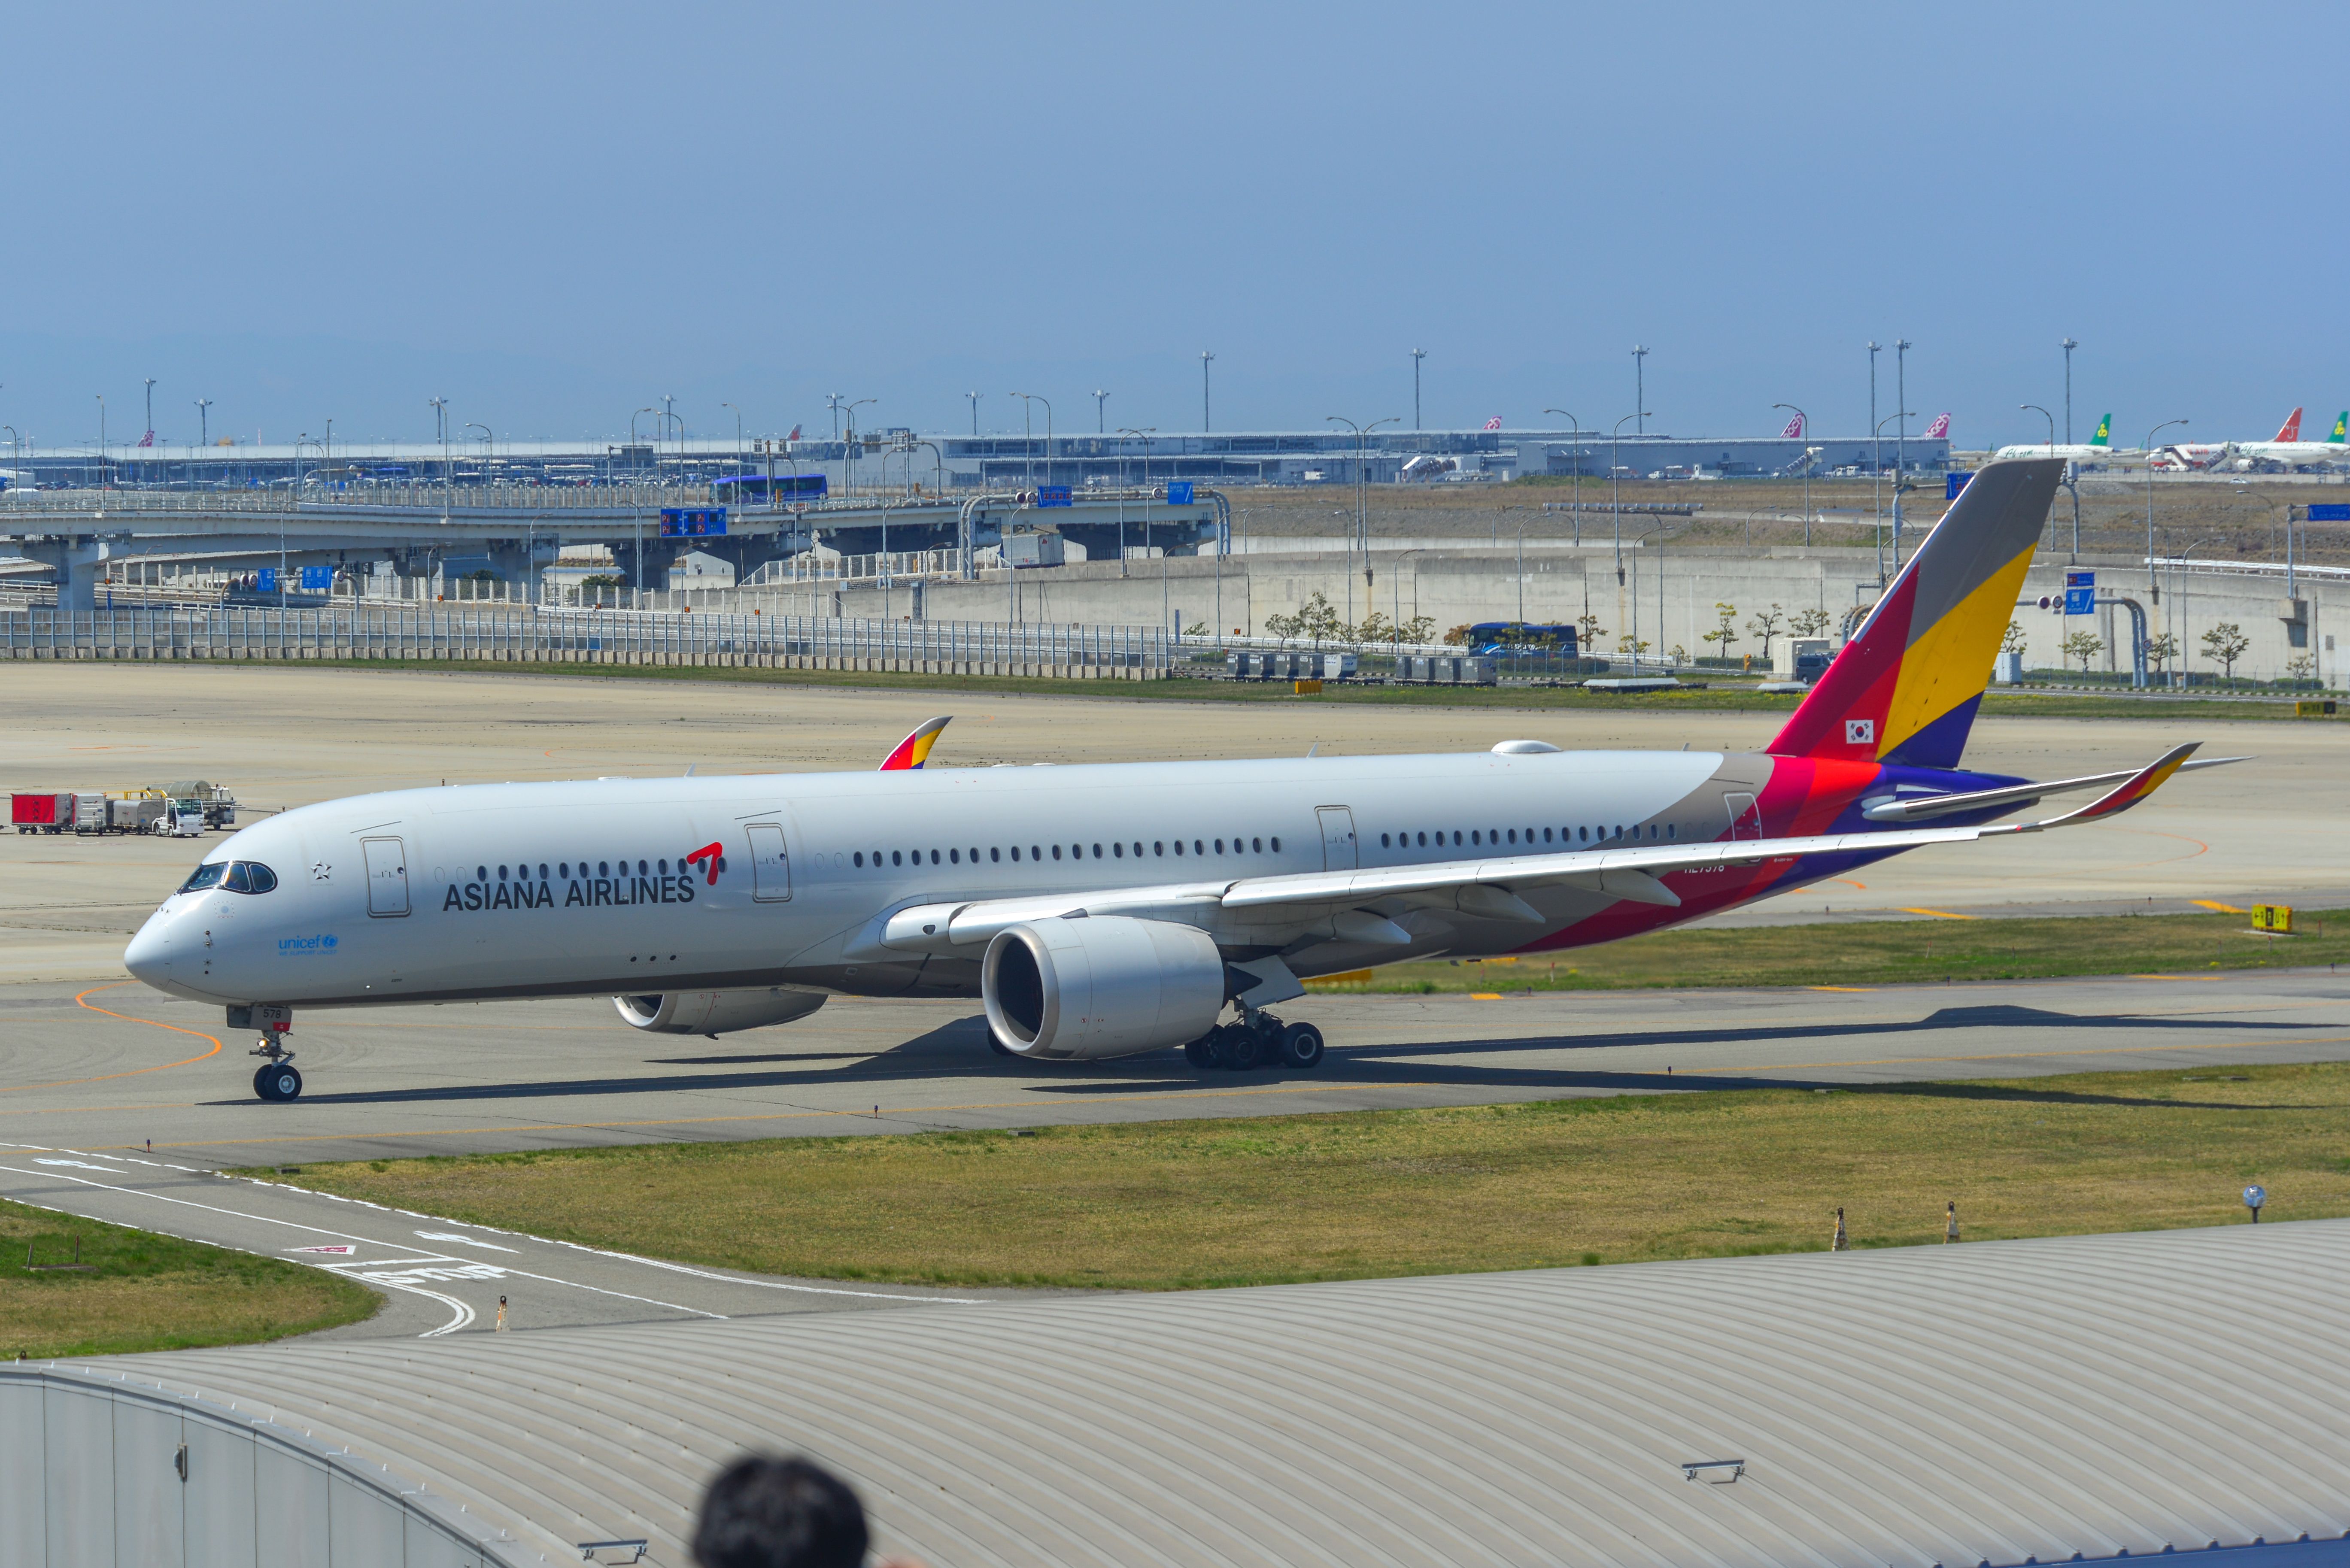 Asiana Airlines Airbus A350-900 taxiing on runway of Kansai Airport.